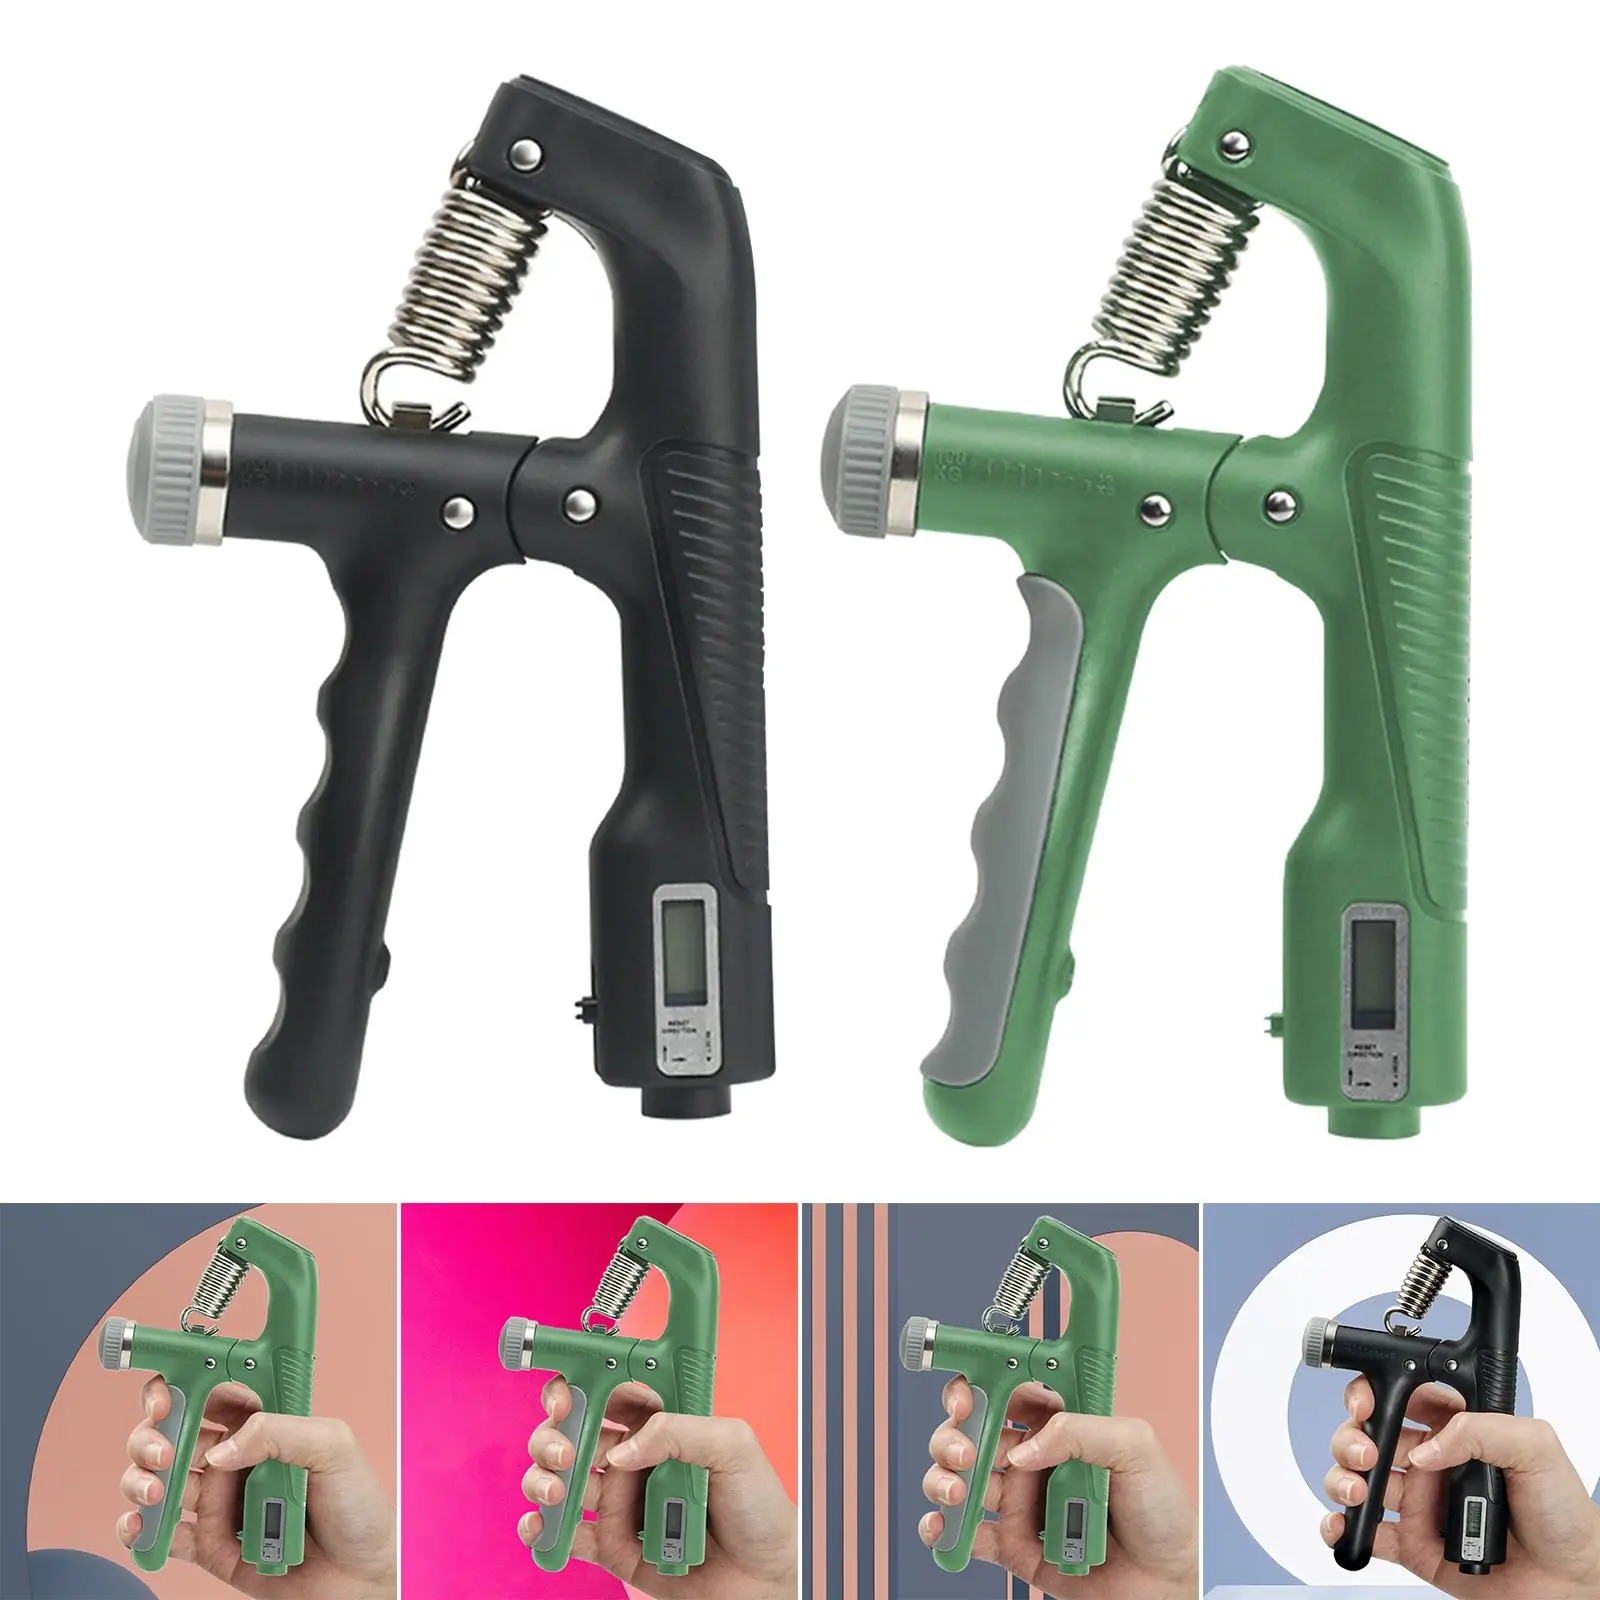 Hand Grip Strengthener Adjustable Resistance Strength Training Forearm Exerciser Countable for Beginners Professionals Home Gym